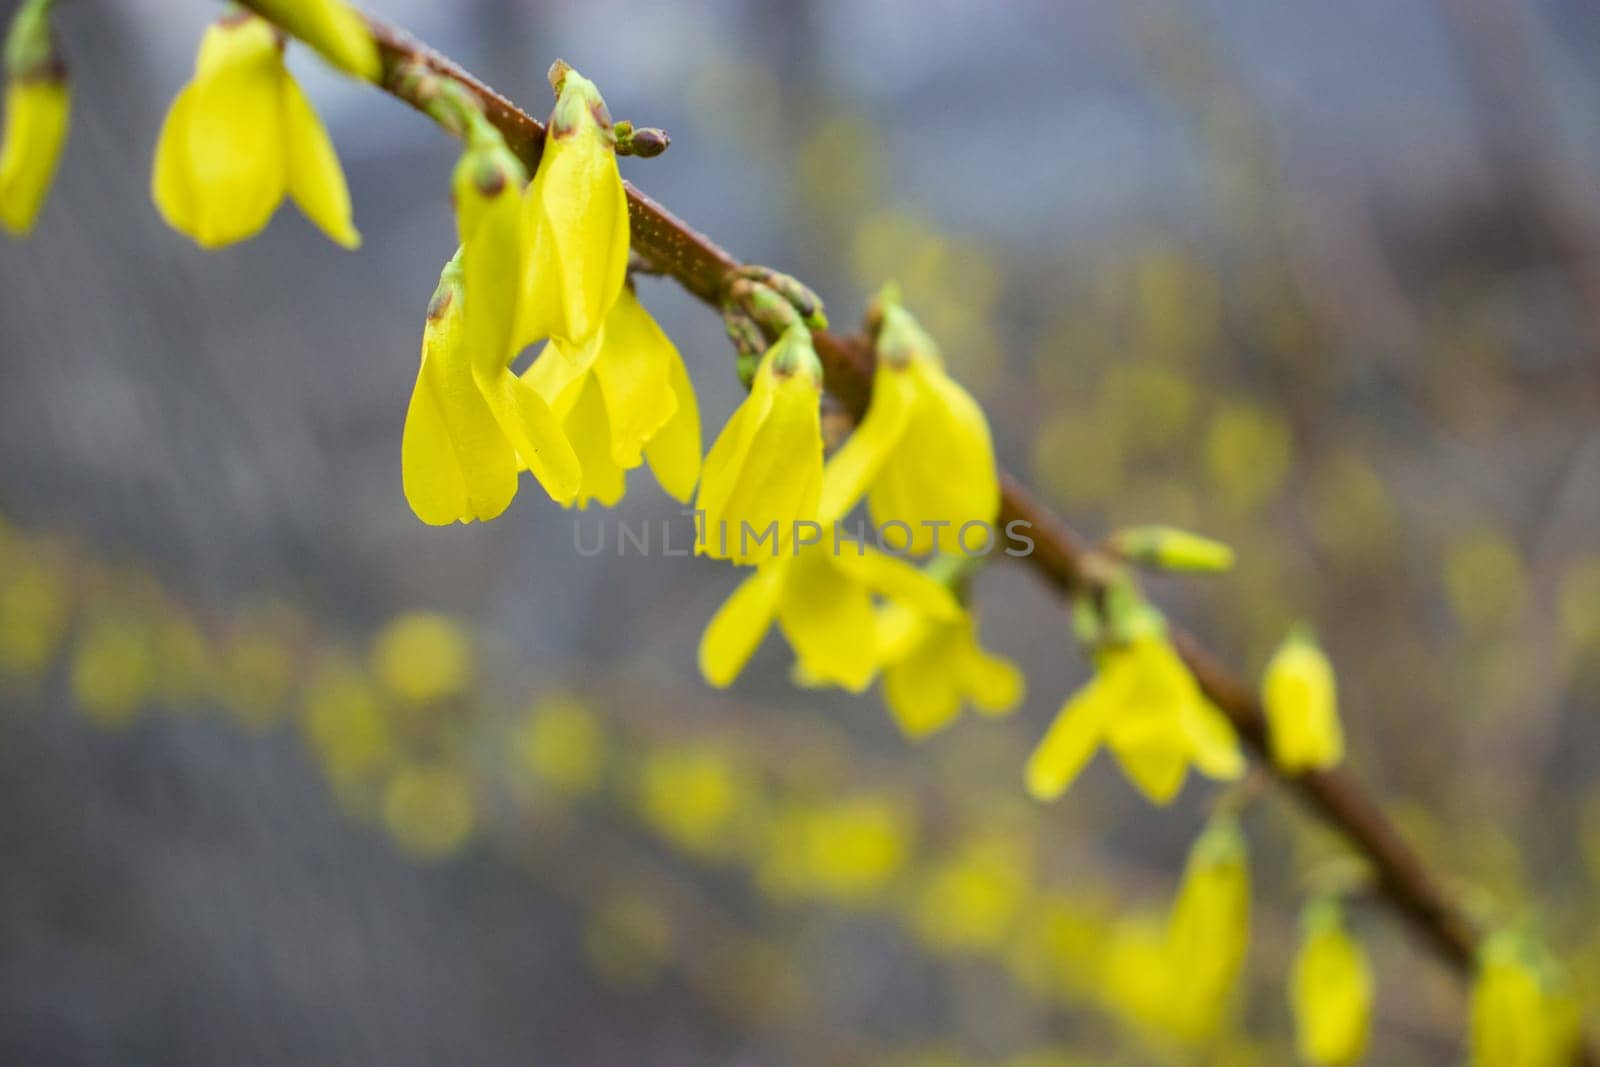 Close up branch of yellow flowers of Forsythia plant concept photo. Easter tree. Blurred background. Golden bell. Yellow flower on a branch. The beauty of spring nature.